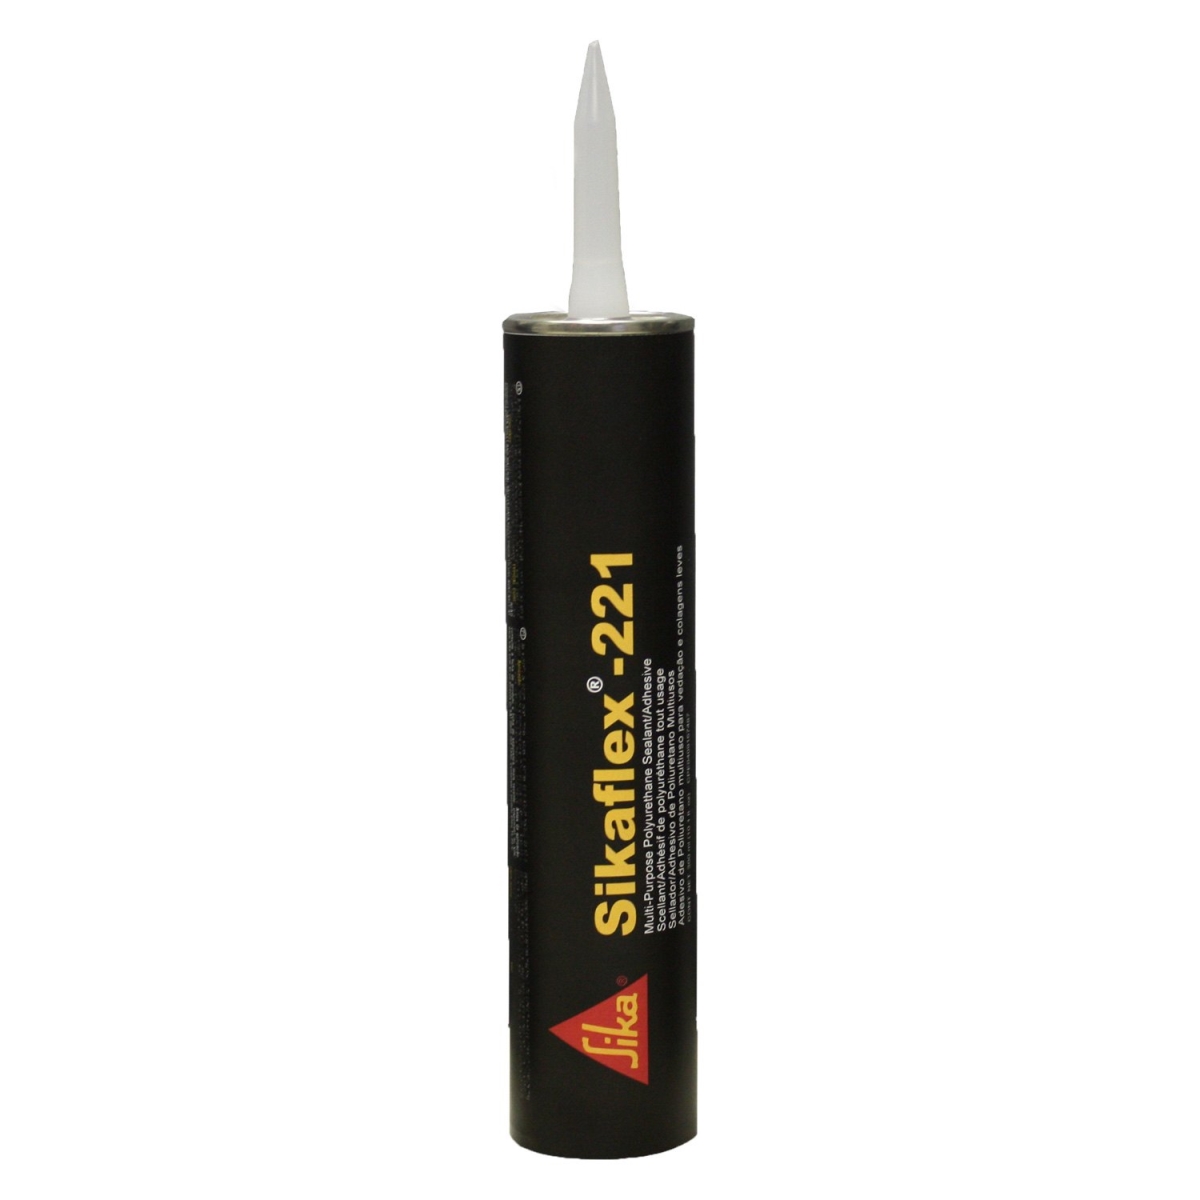 Picture of AP Products APP017-90892 300 ml Sikaflex 221 Non-Sag Silver Sealant Cartridge